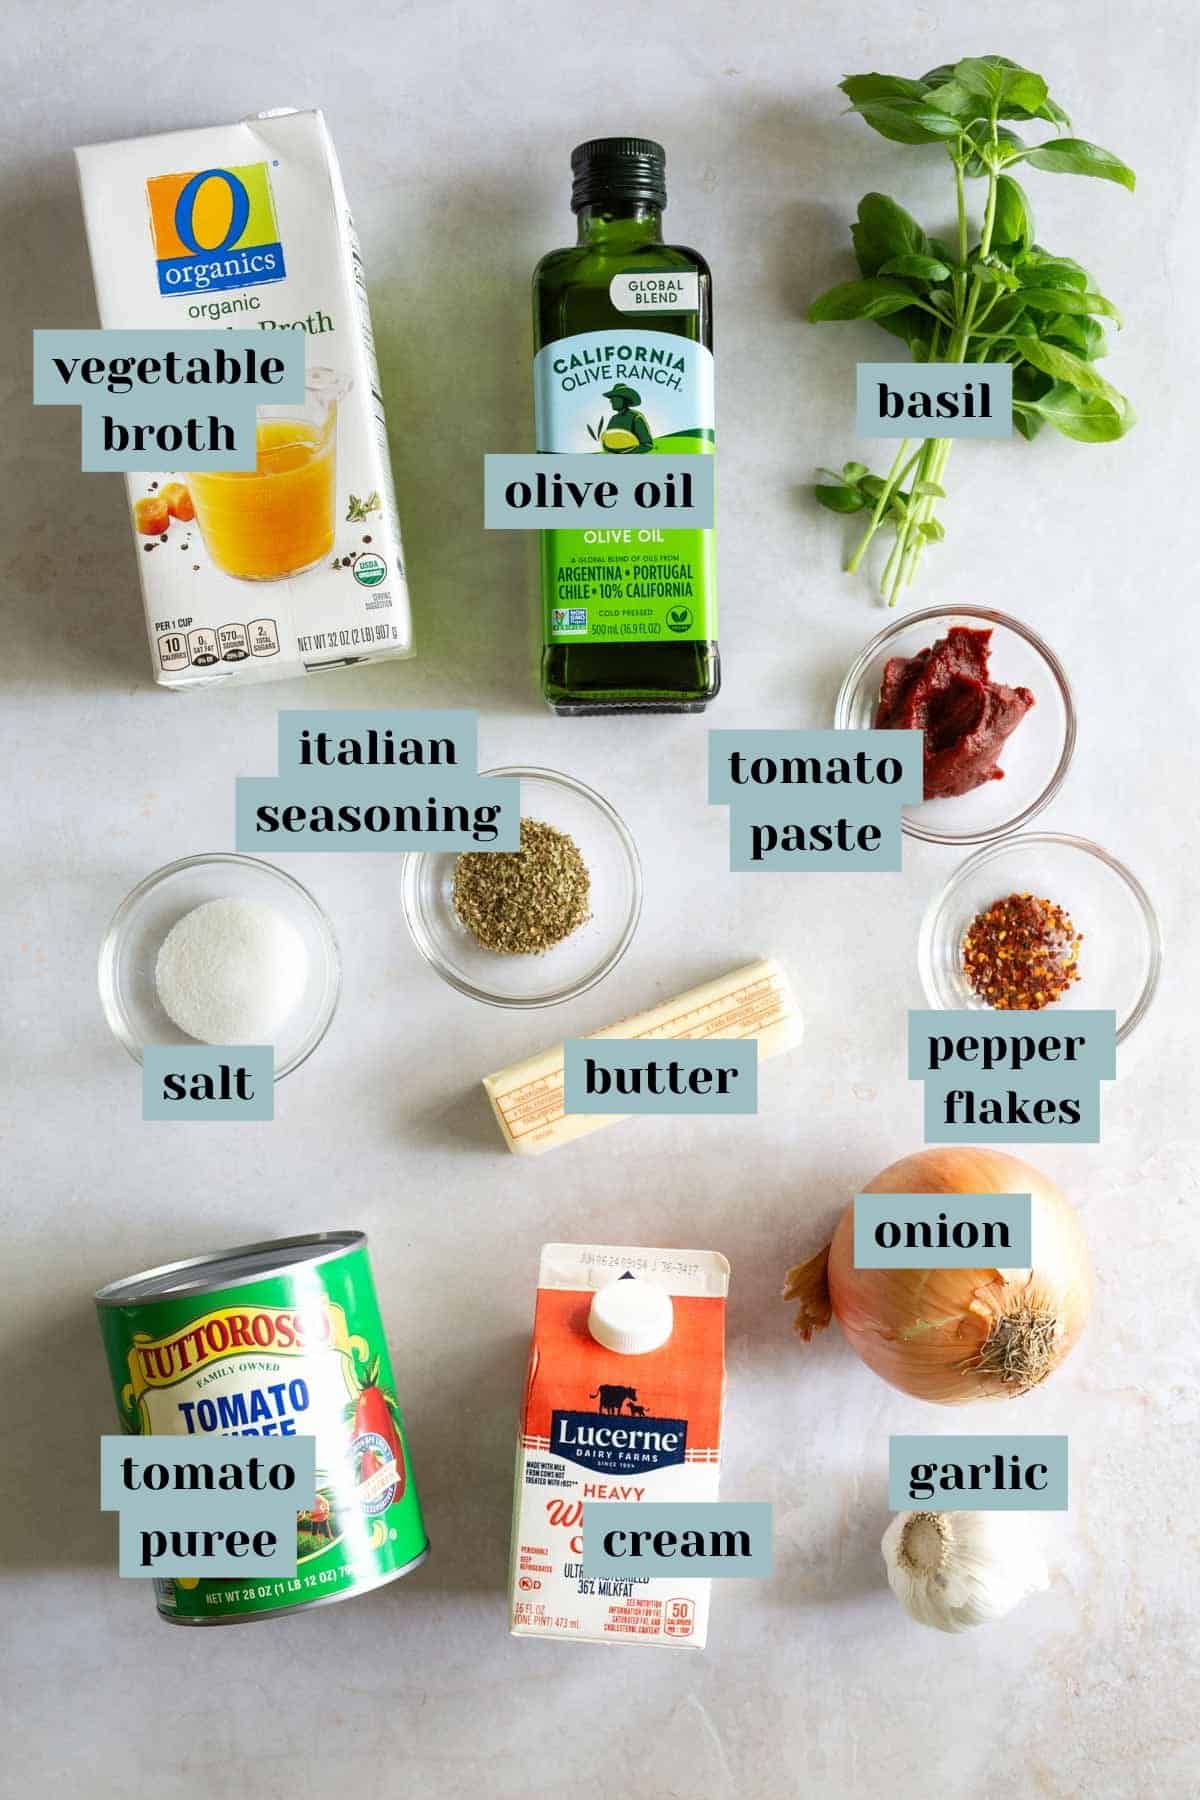 Ingredients laid out on a surface include basil, olive oil, vegetable broth, Italian seasoning, tomato paste, salt, butter, pepper flakes, onion, garlic, heavy cream, and tomato puree.